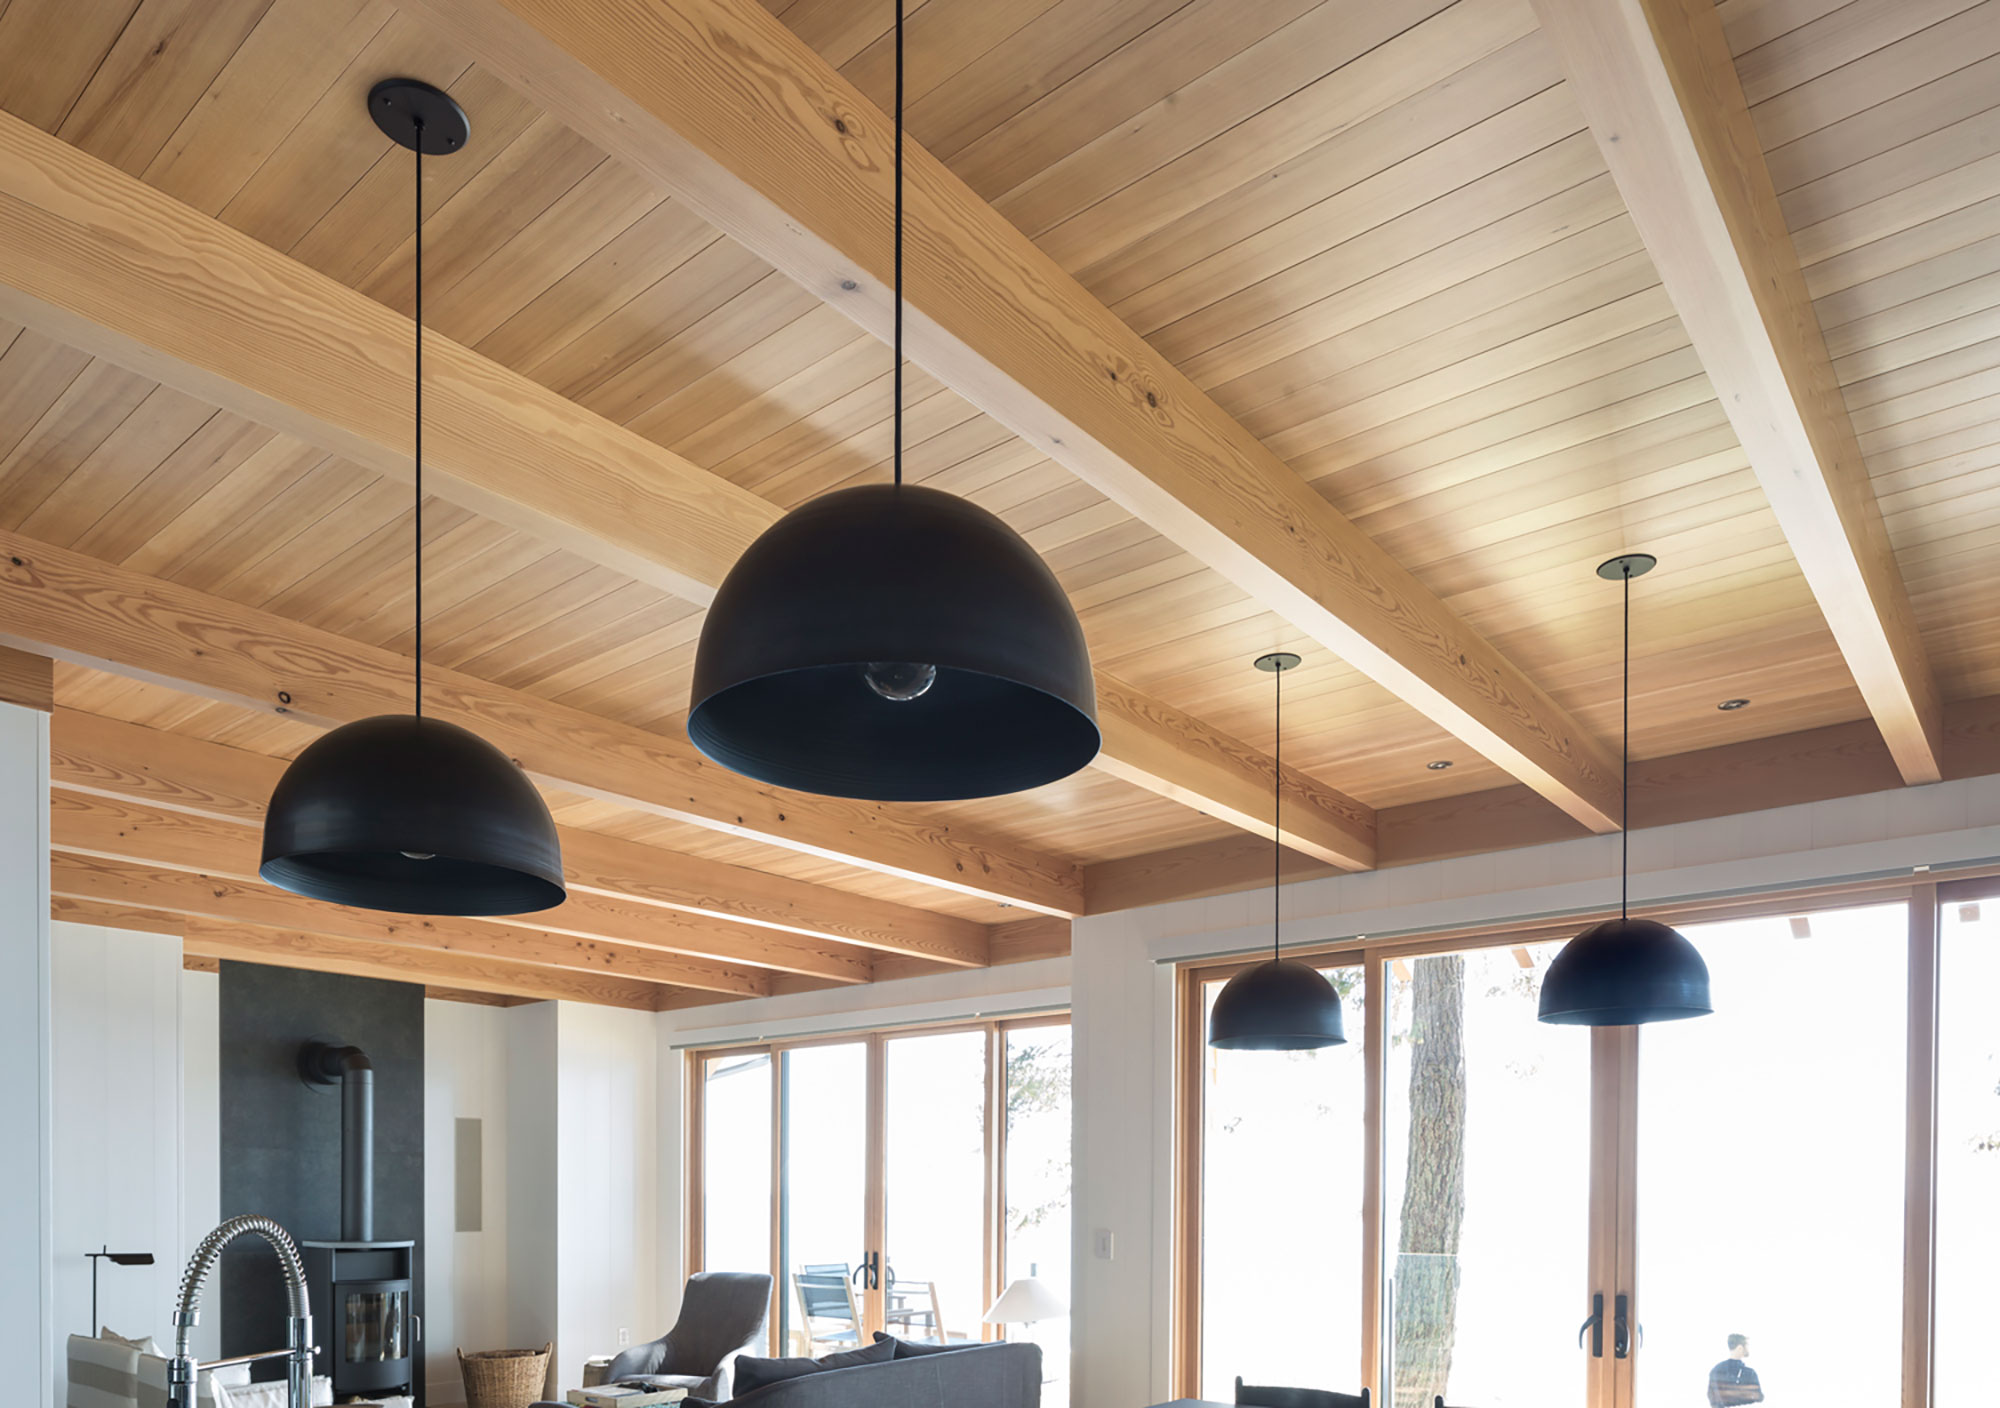 Pacific HemFir Timbers ceiling with modern black lamps handing from it